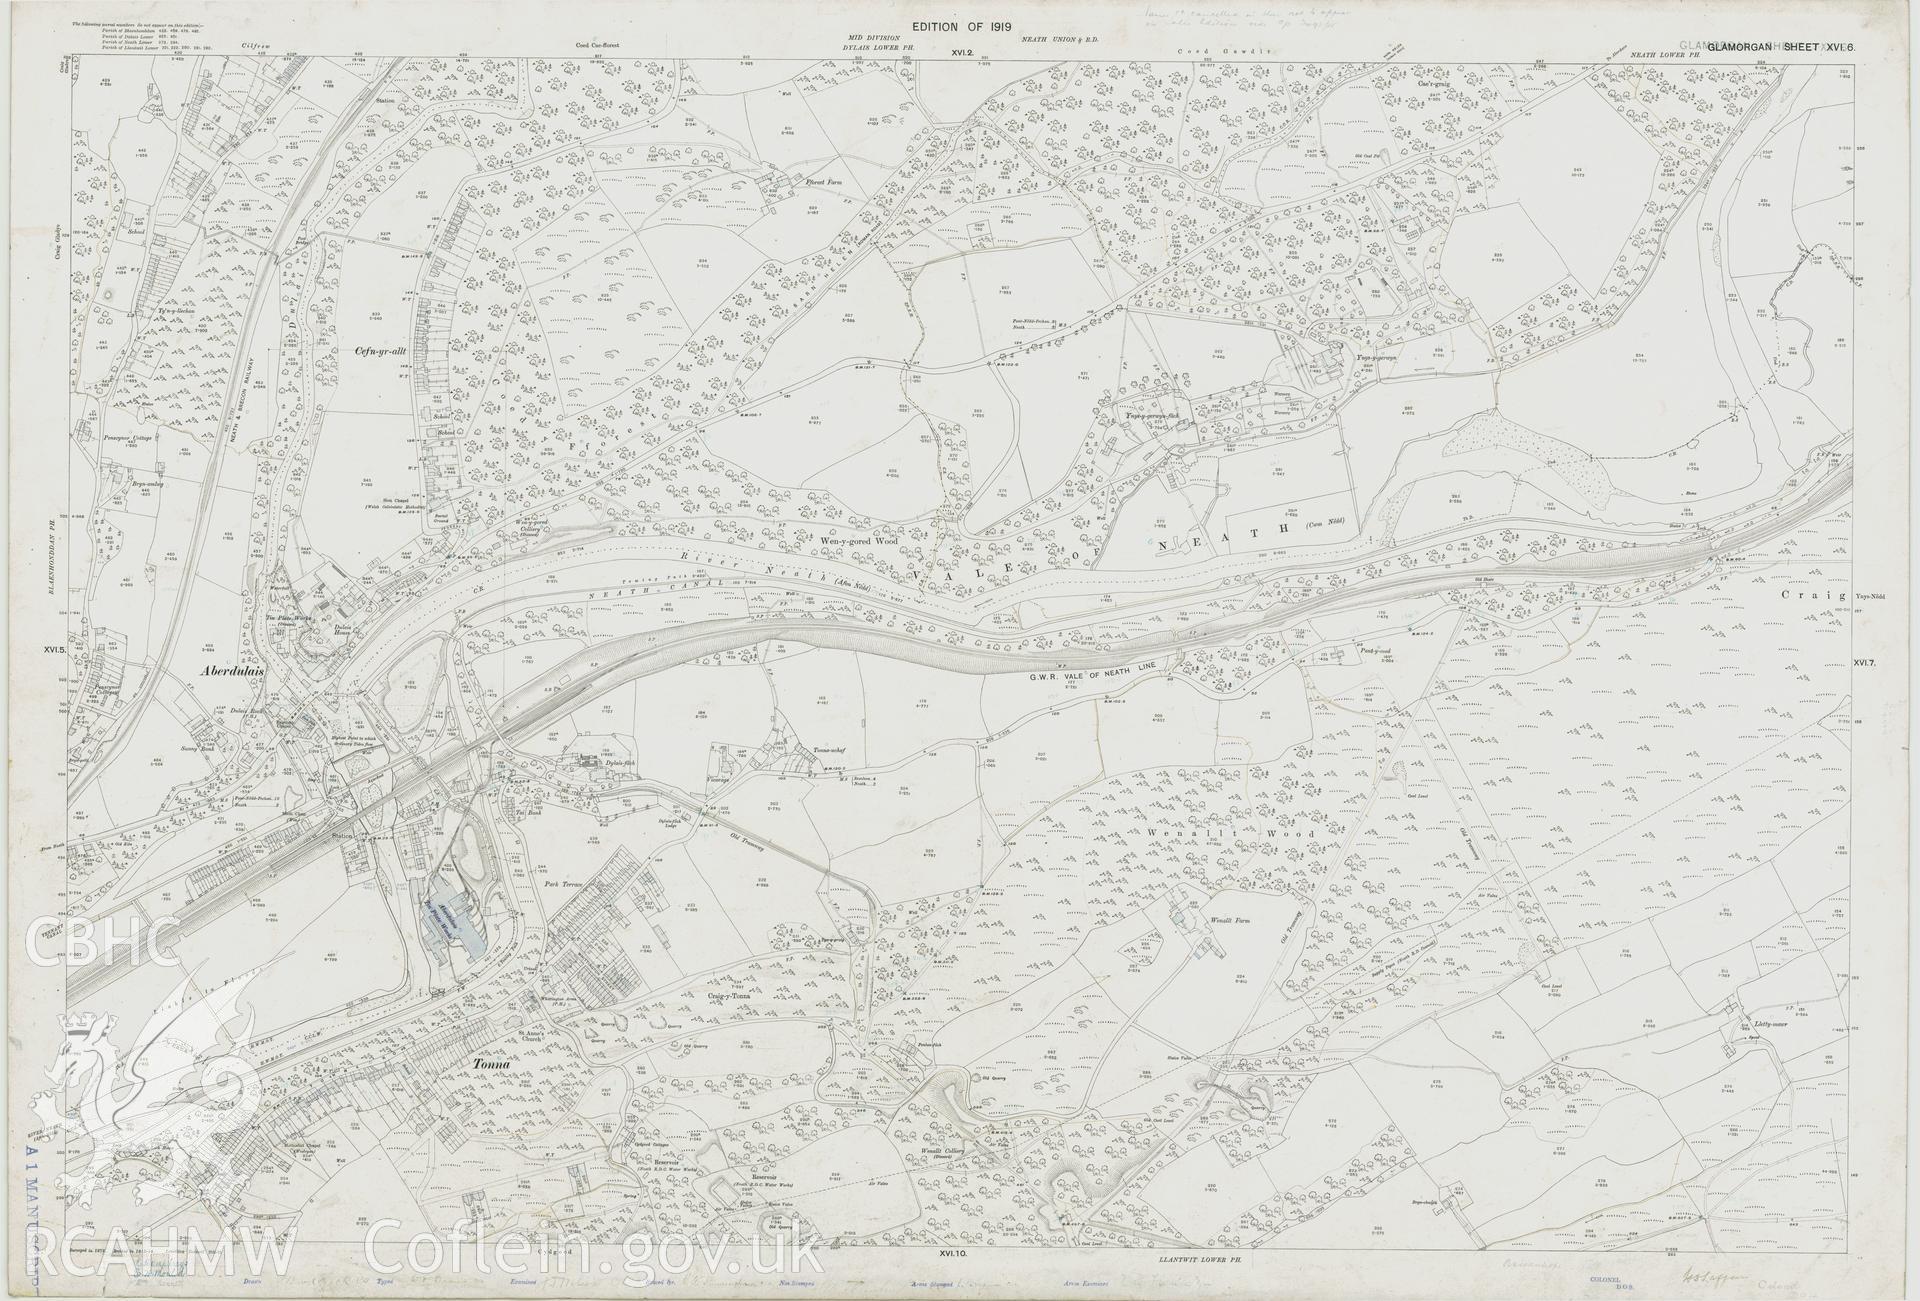 Digitized copy of Ordnance Survey 25 inch 1919 edition map of the Vale of Neath area.